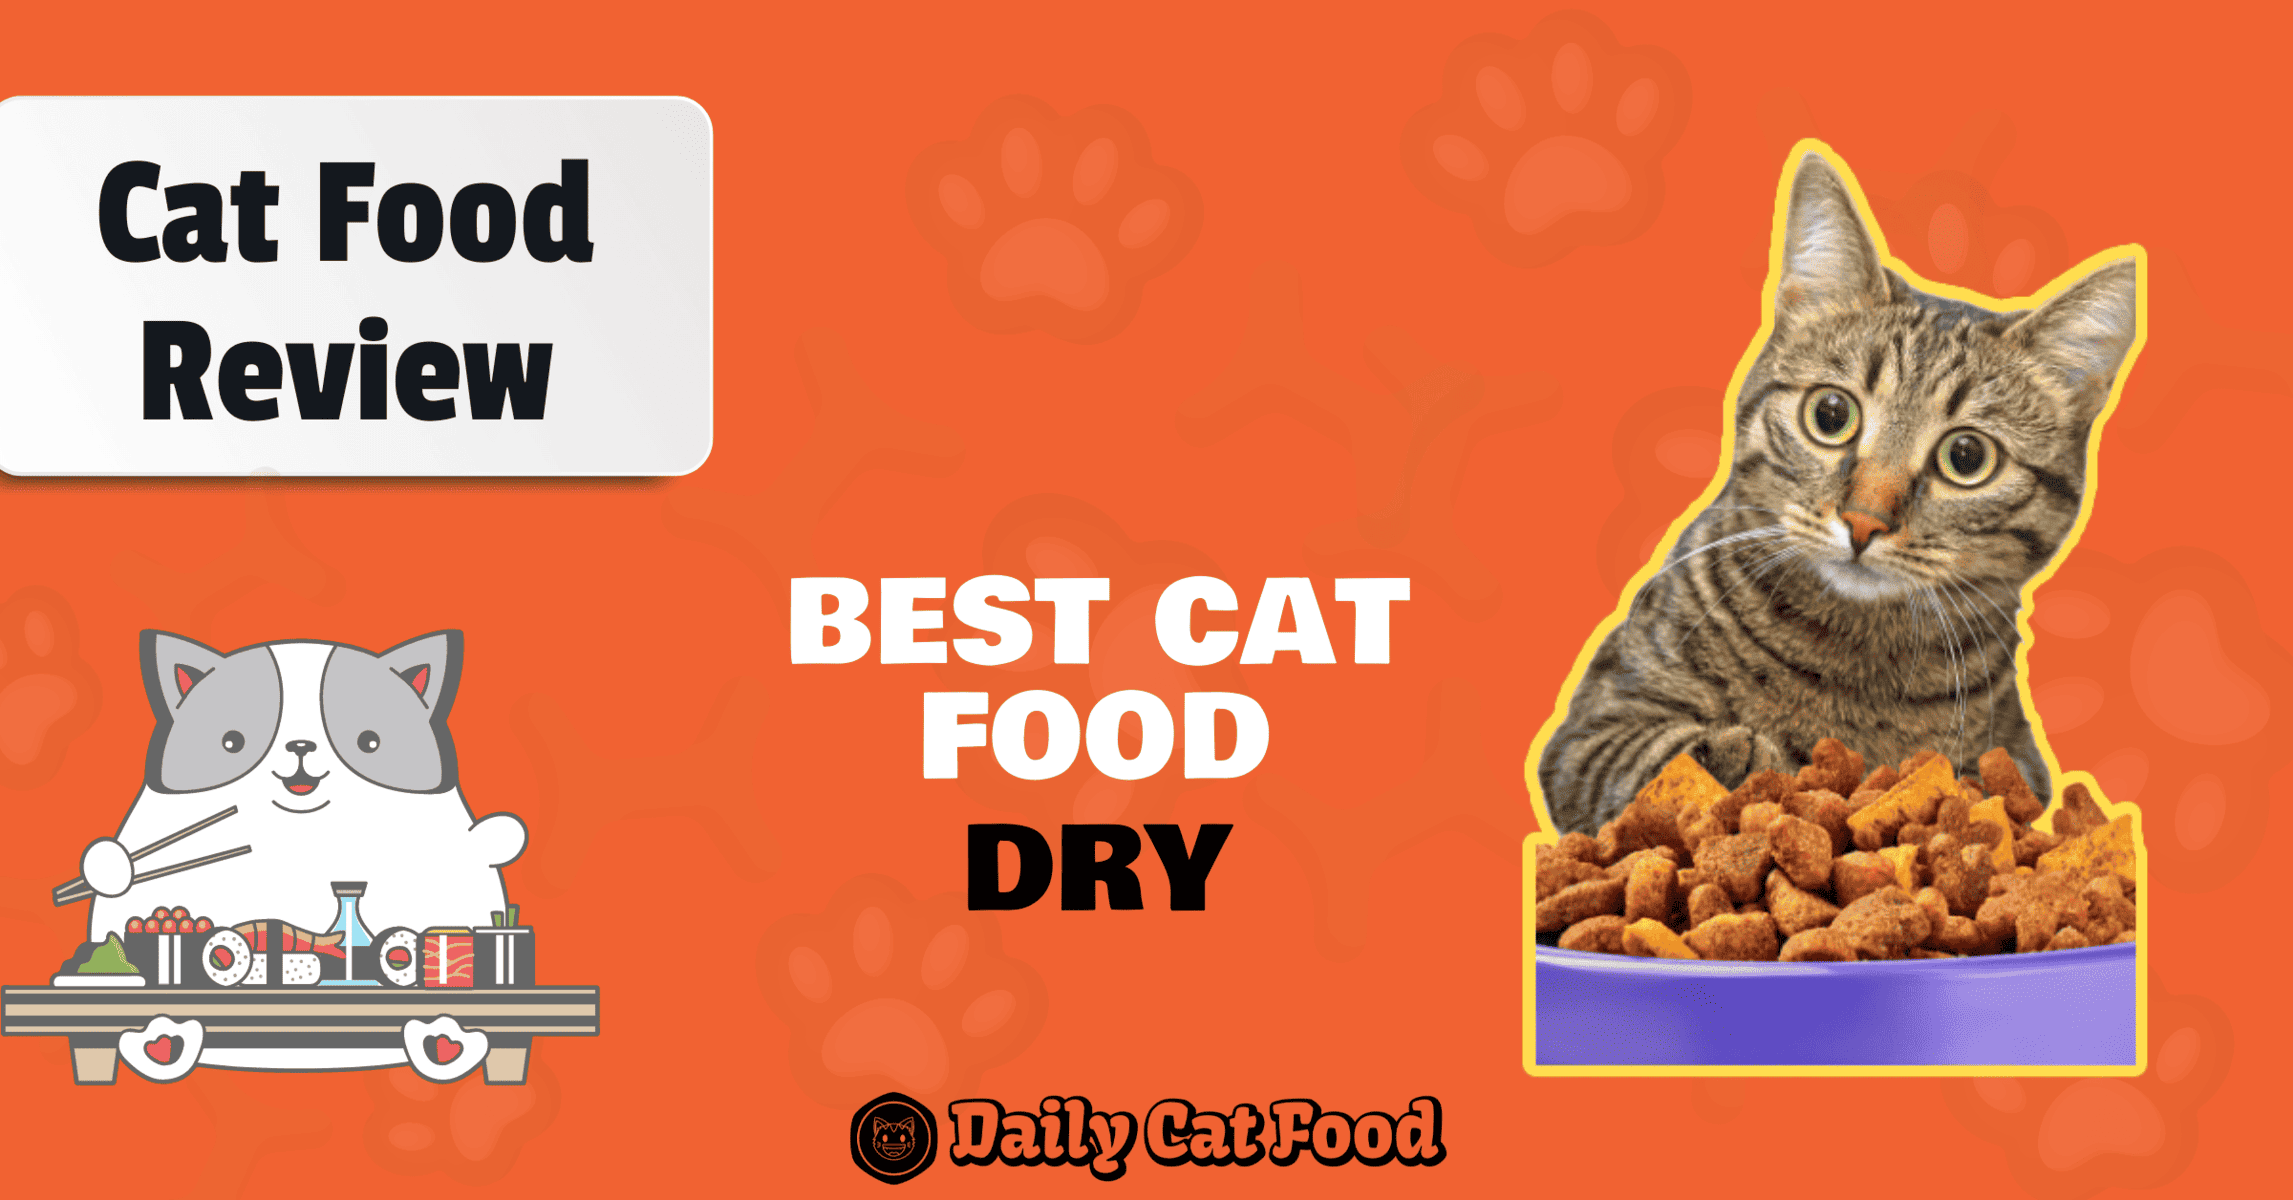 best dry cat food poster